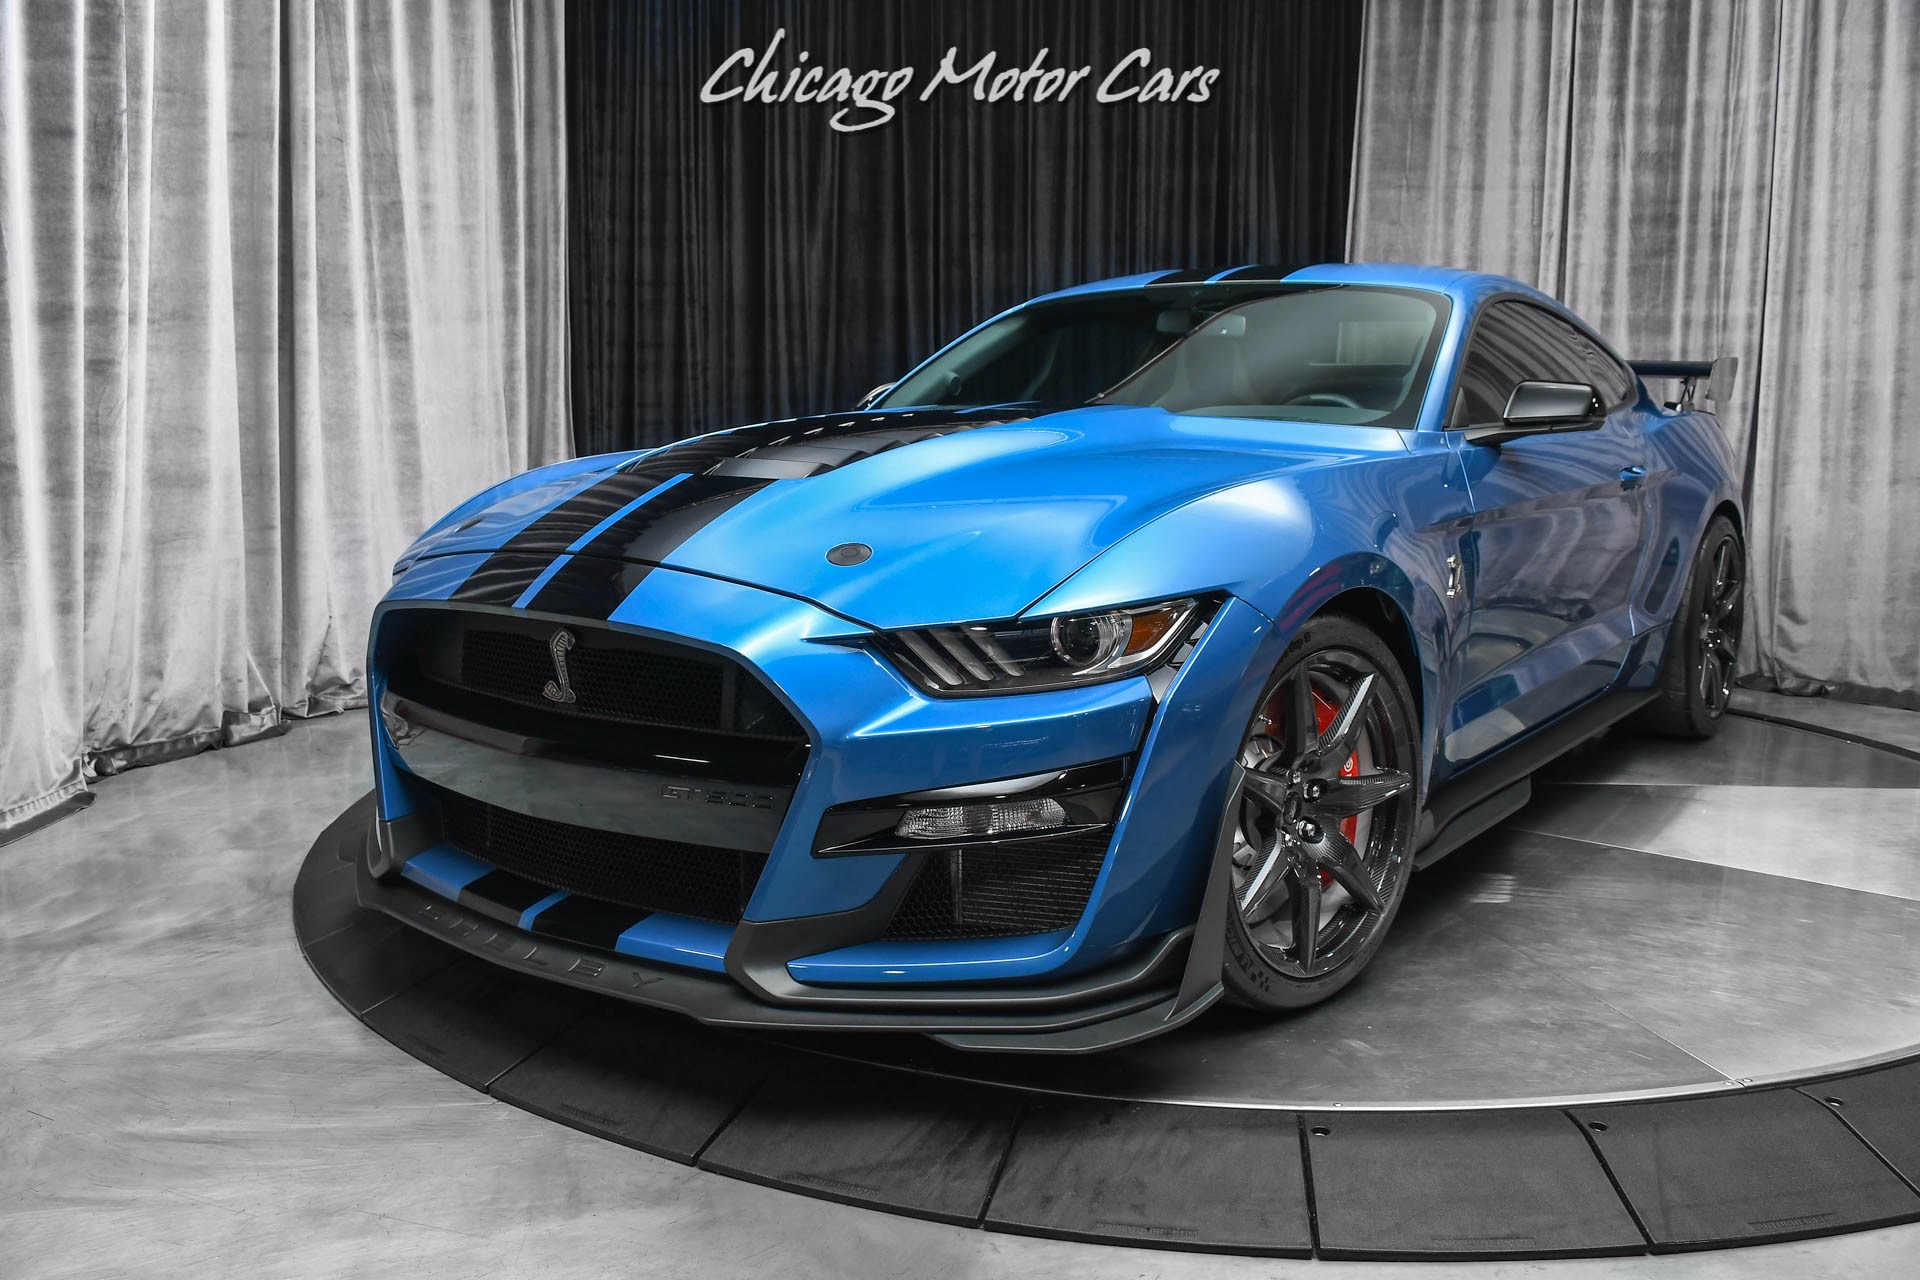 Used-2020-Ford-Mustang-Shelby-GT500-Carbon-Fiber-Track-Pack-Golden-Ticket-Technology-Pack-396-Mile